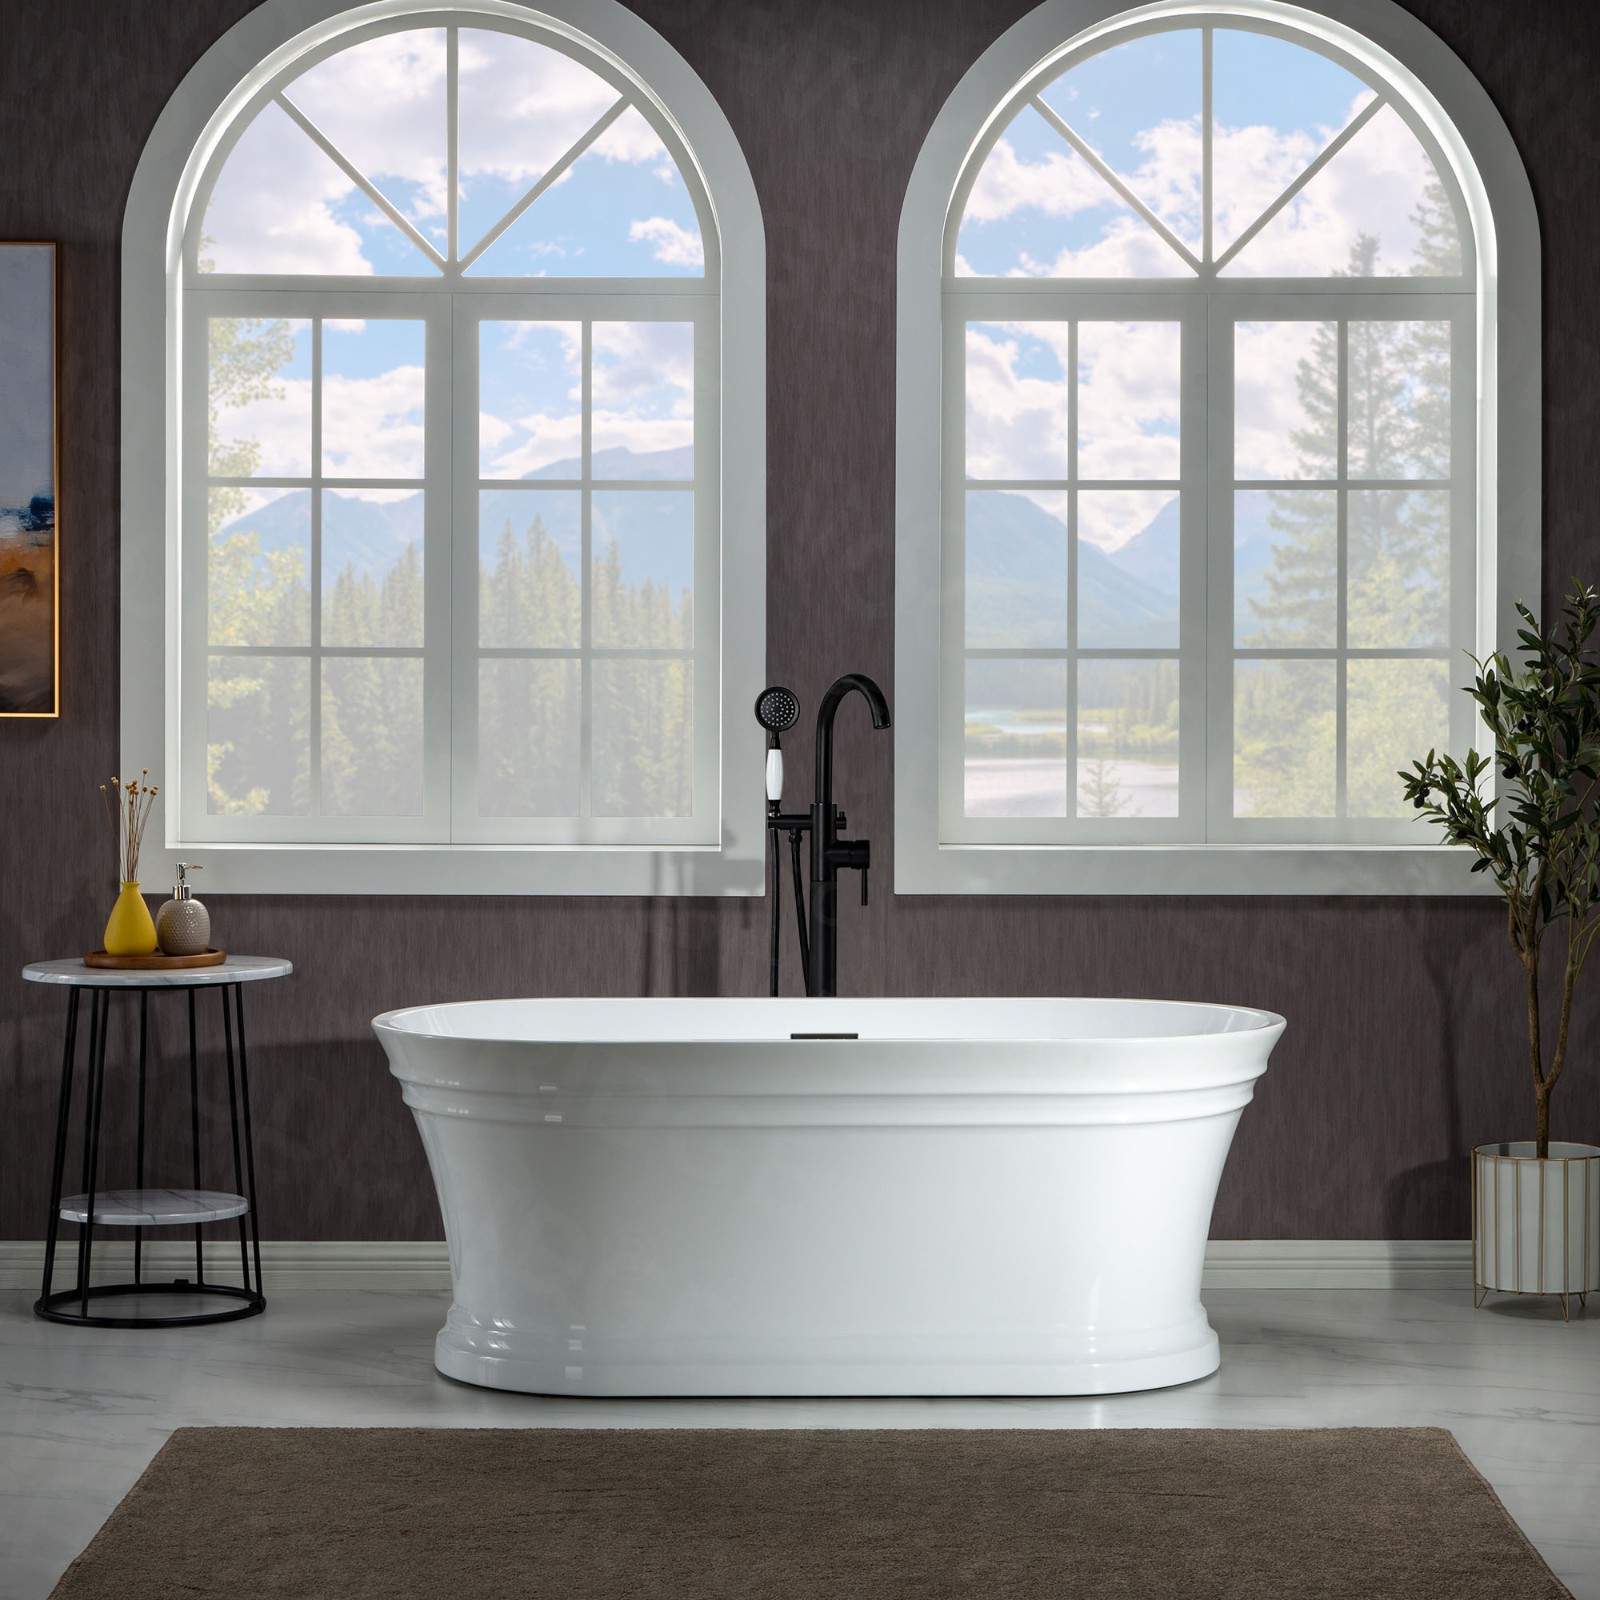  WOODBRIDGE 67 in. Freestanding Double Ended Acrylic Soaking Bathtub with Center Drain Assembly and Overflow, BTA1537/B1537, Glossy White_7683